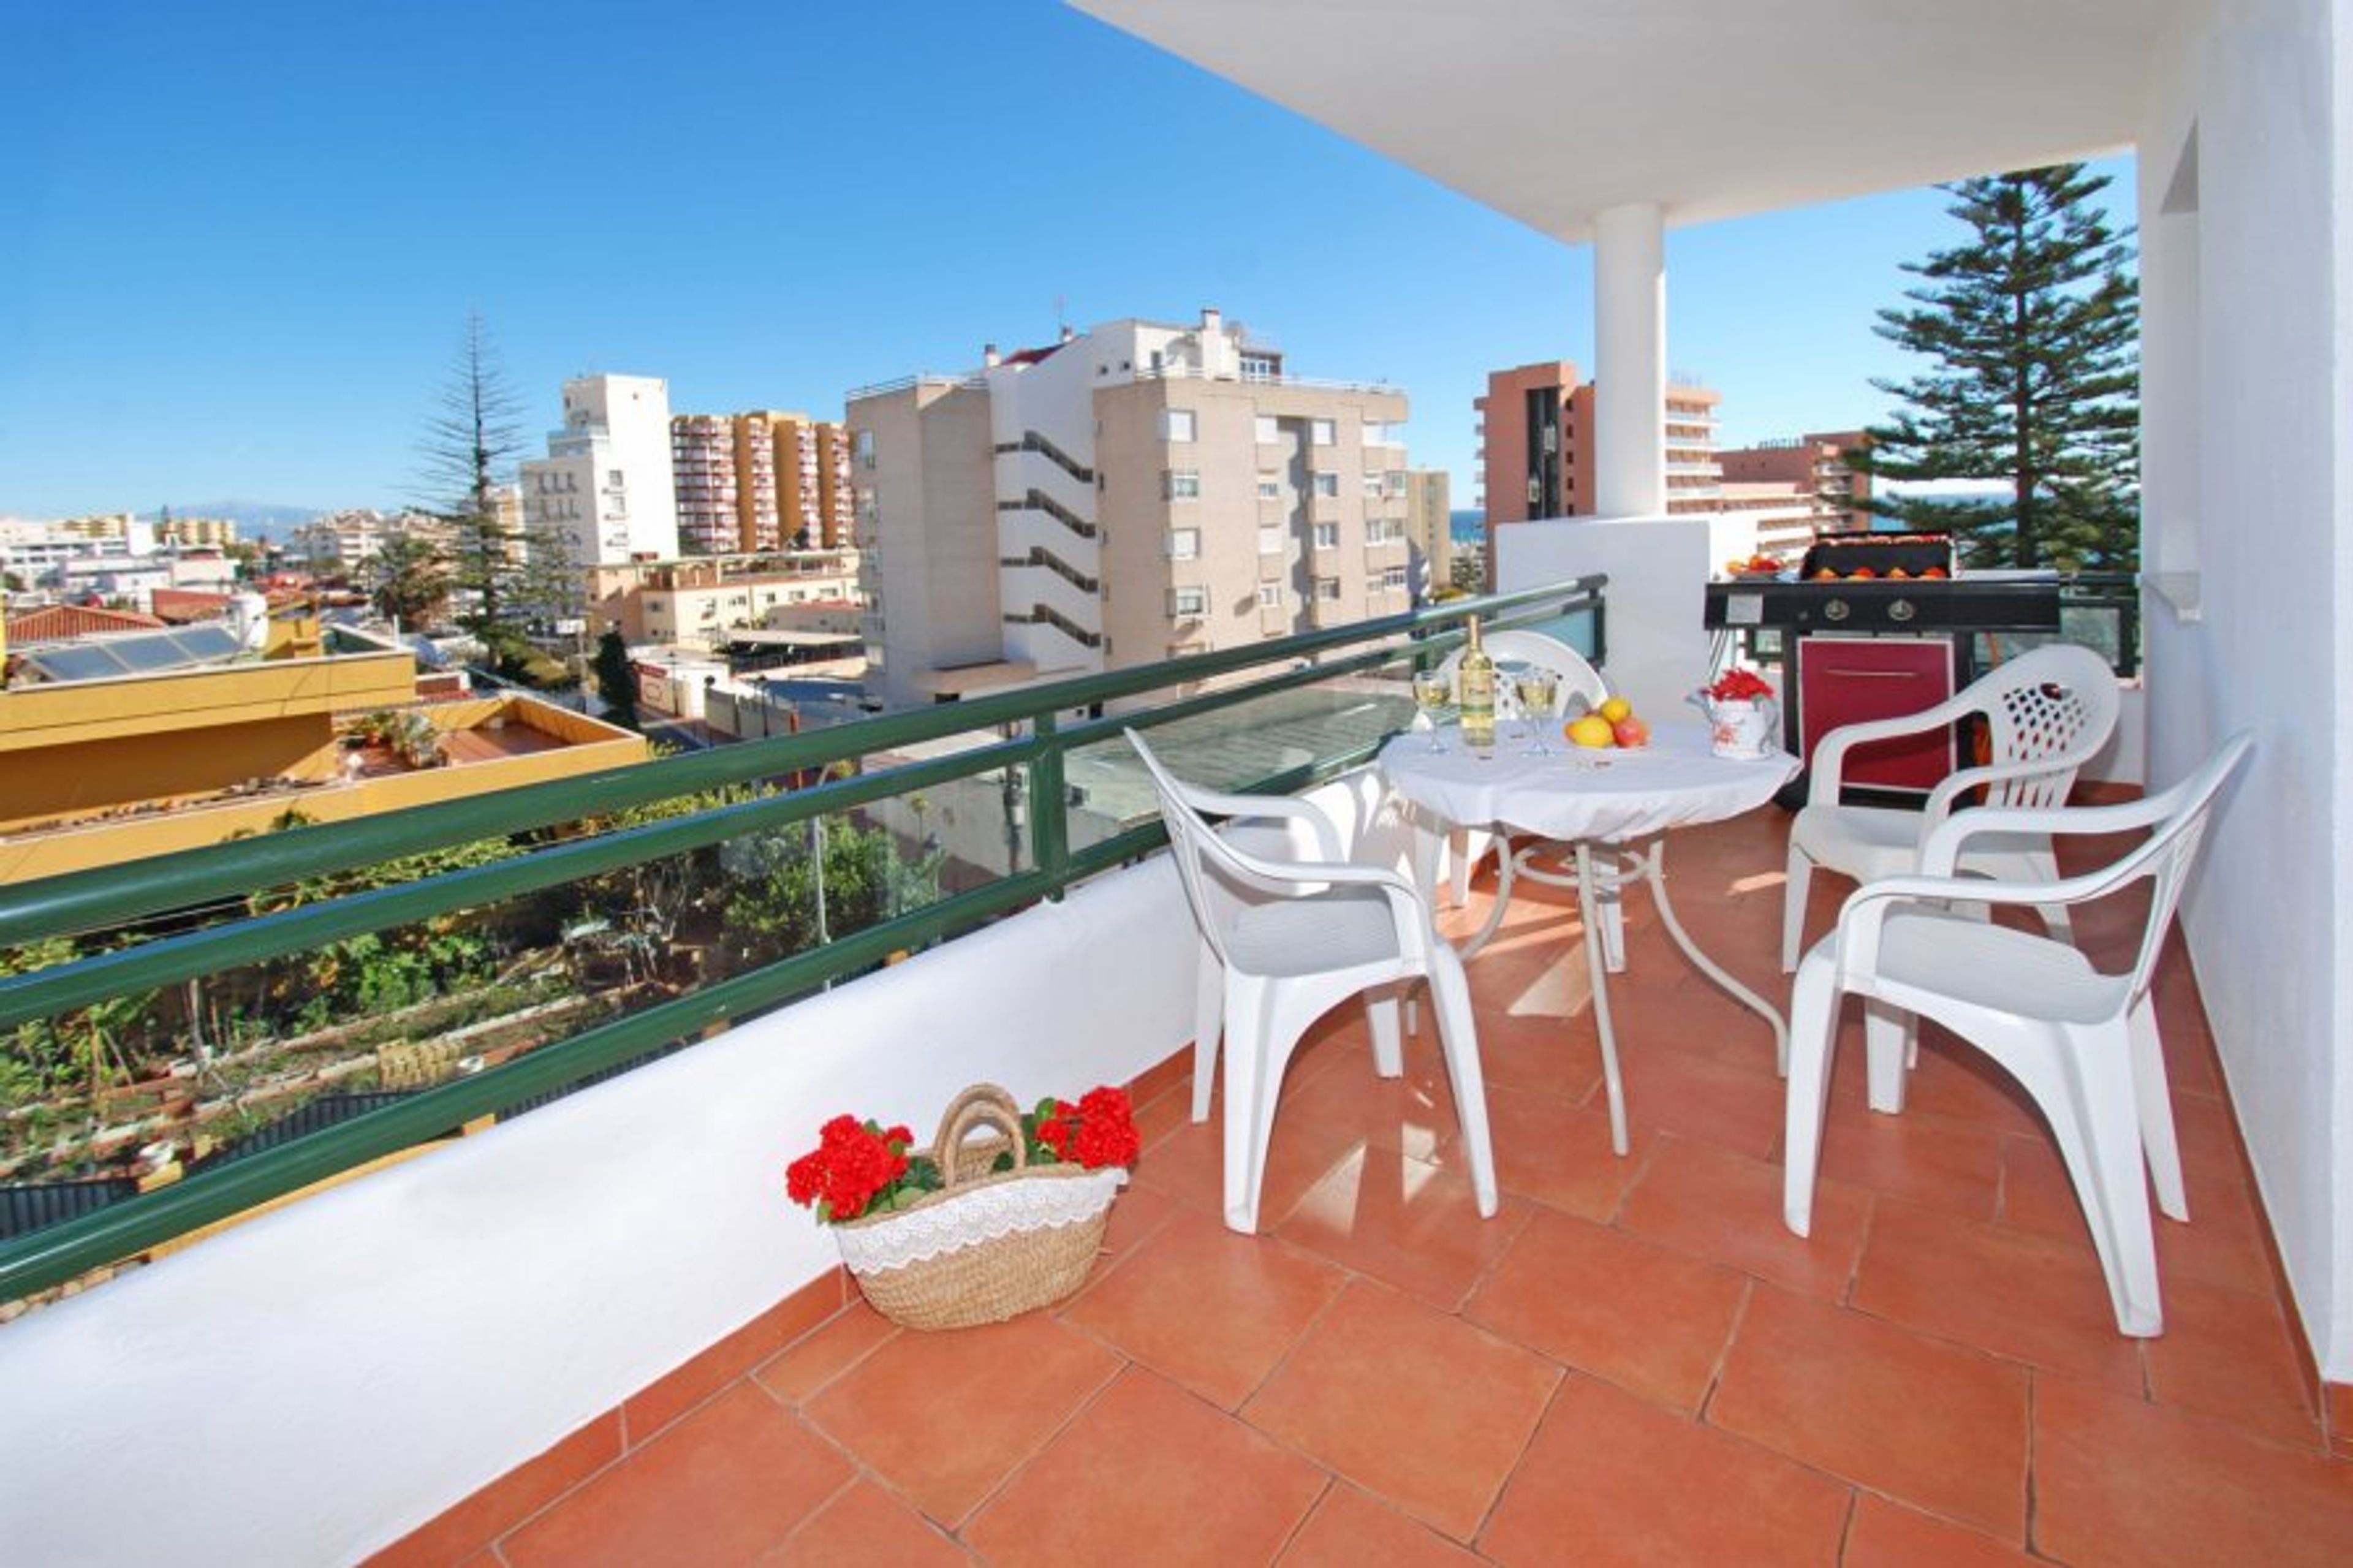 Excellent terrace with table and chairs for dining alfresco!